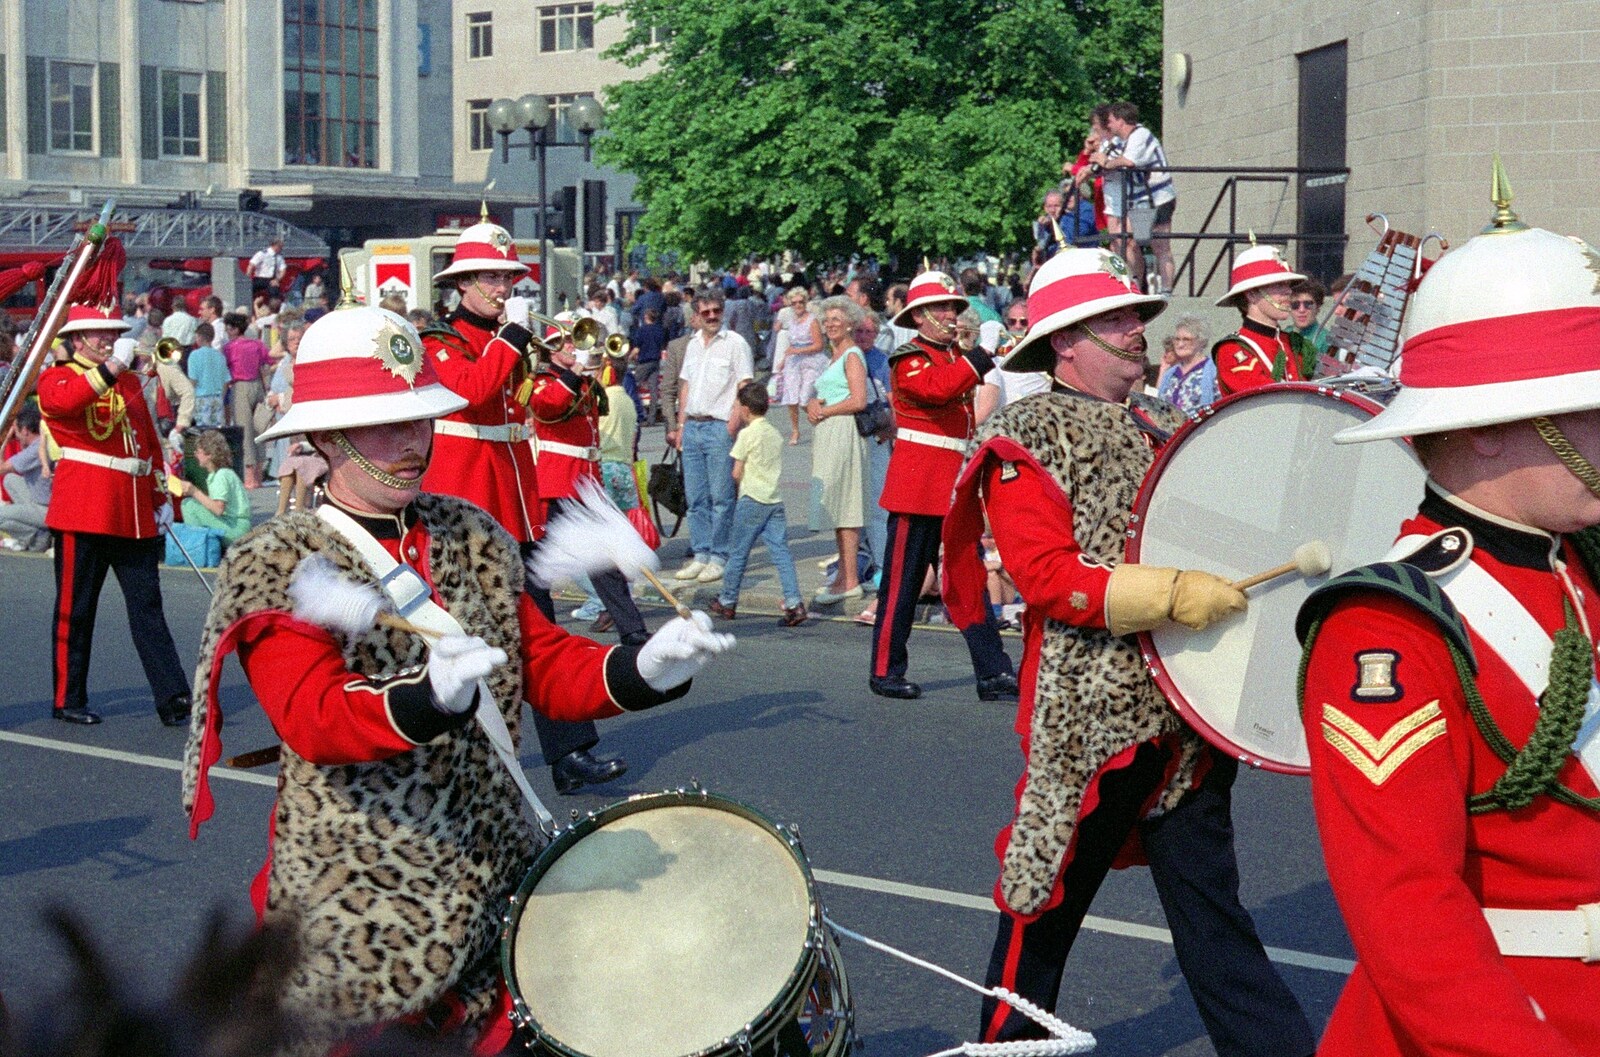 Full-on leapoard skins from Chantal and Andy's Wedding, and the Lord Mayor's Parade, Plymouth - 20th May 1987